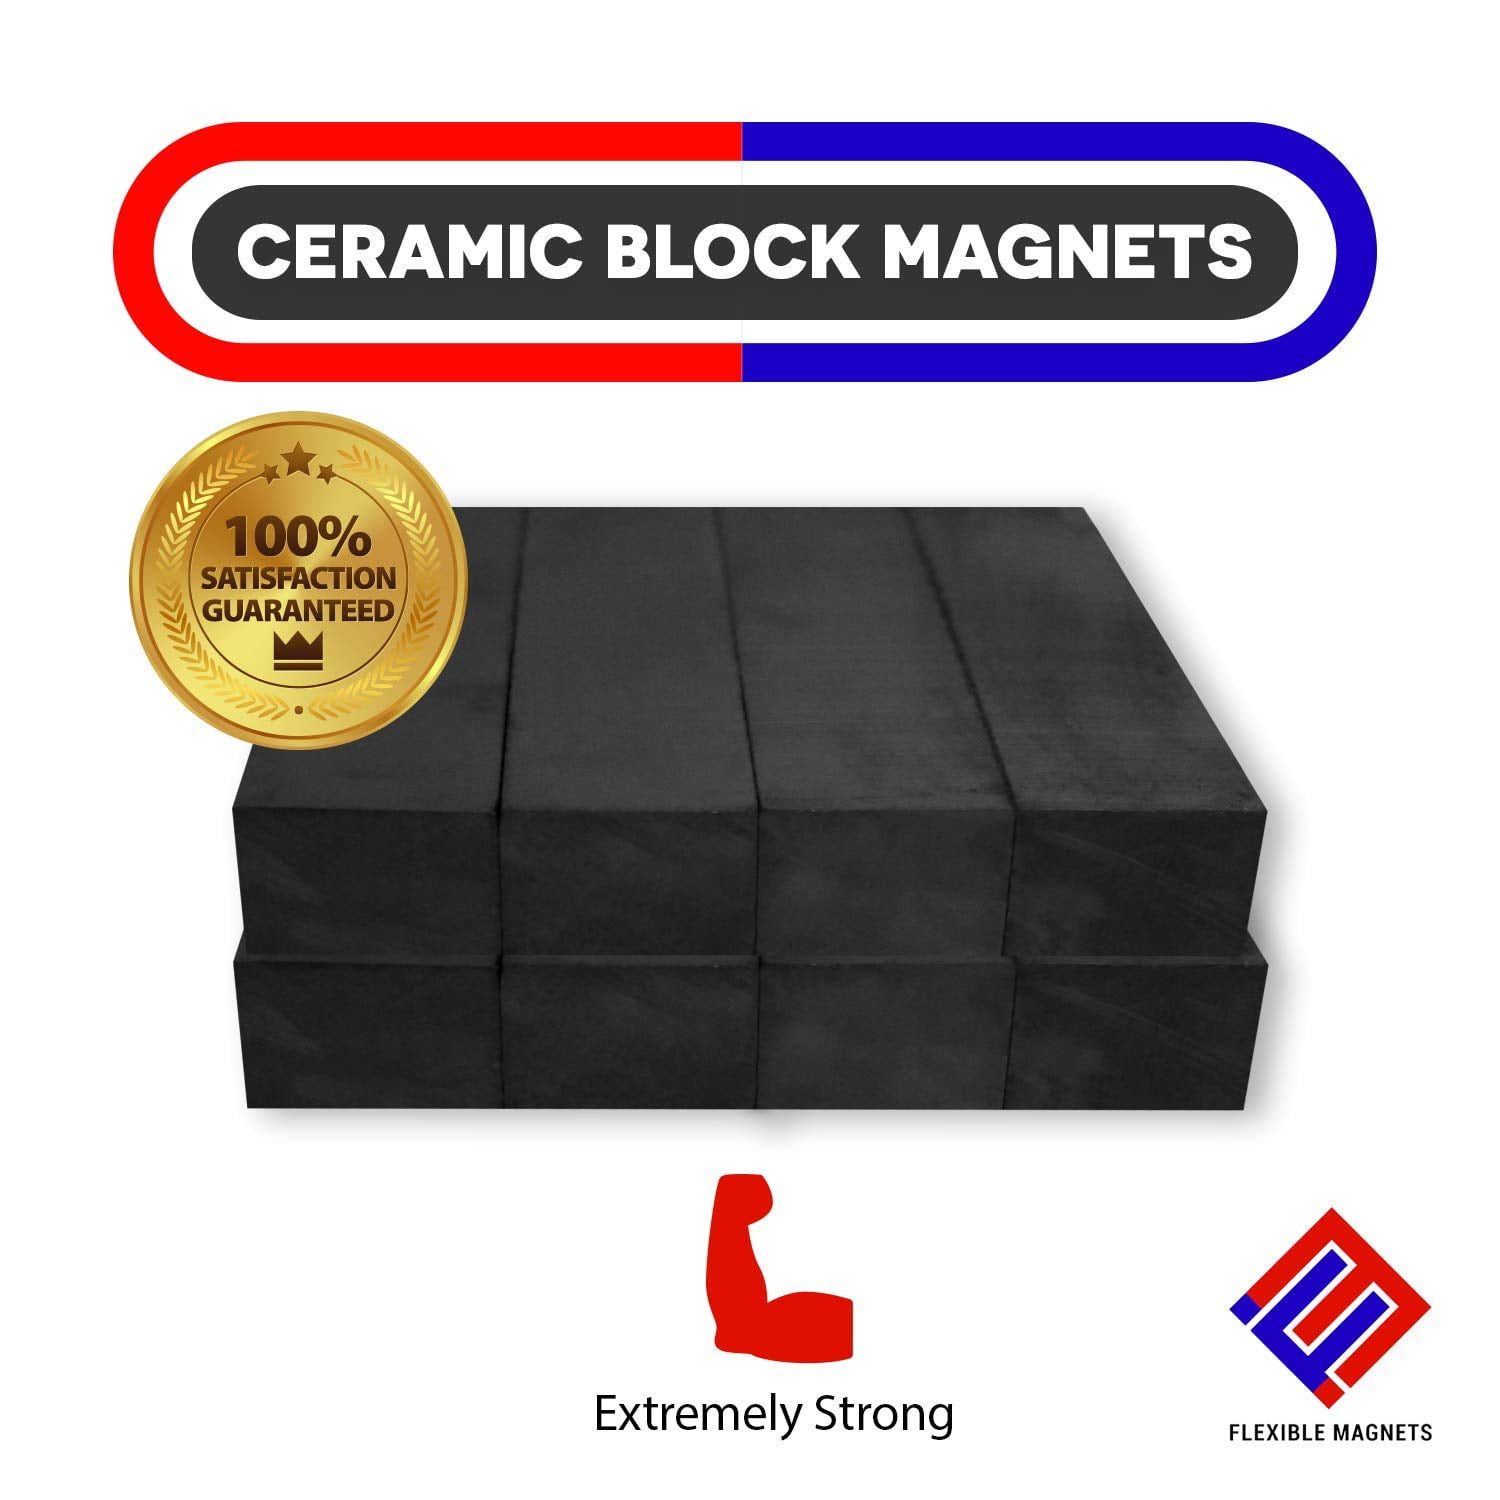 Hard Ferrite Grade 8-50 Pieces for Crafts 1 7/8 x 7/8 x 3/8 Ceramic Magnets Grade 8 CMS Magnetics Domino Size Magnet Science and Hobbies 